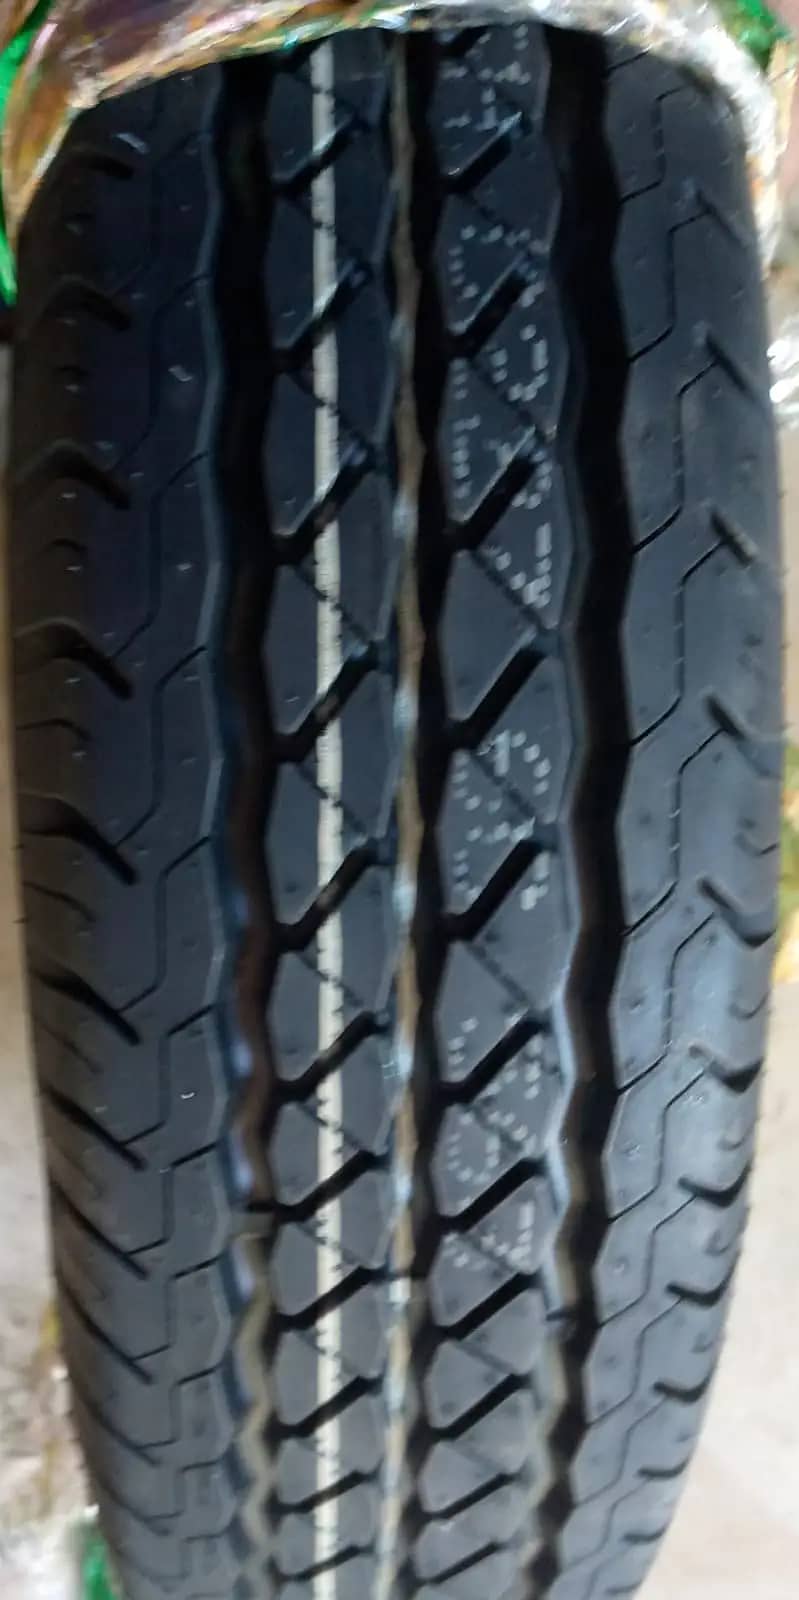 New Tyres Alloy Rim For Sale 1